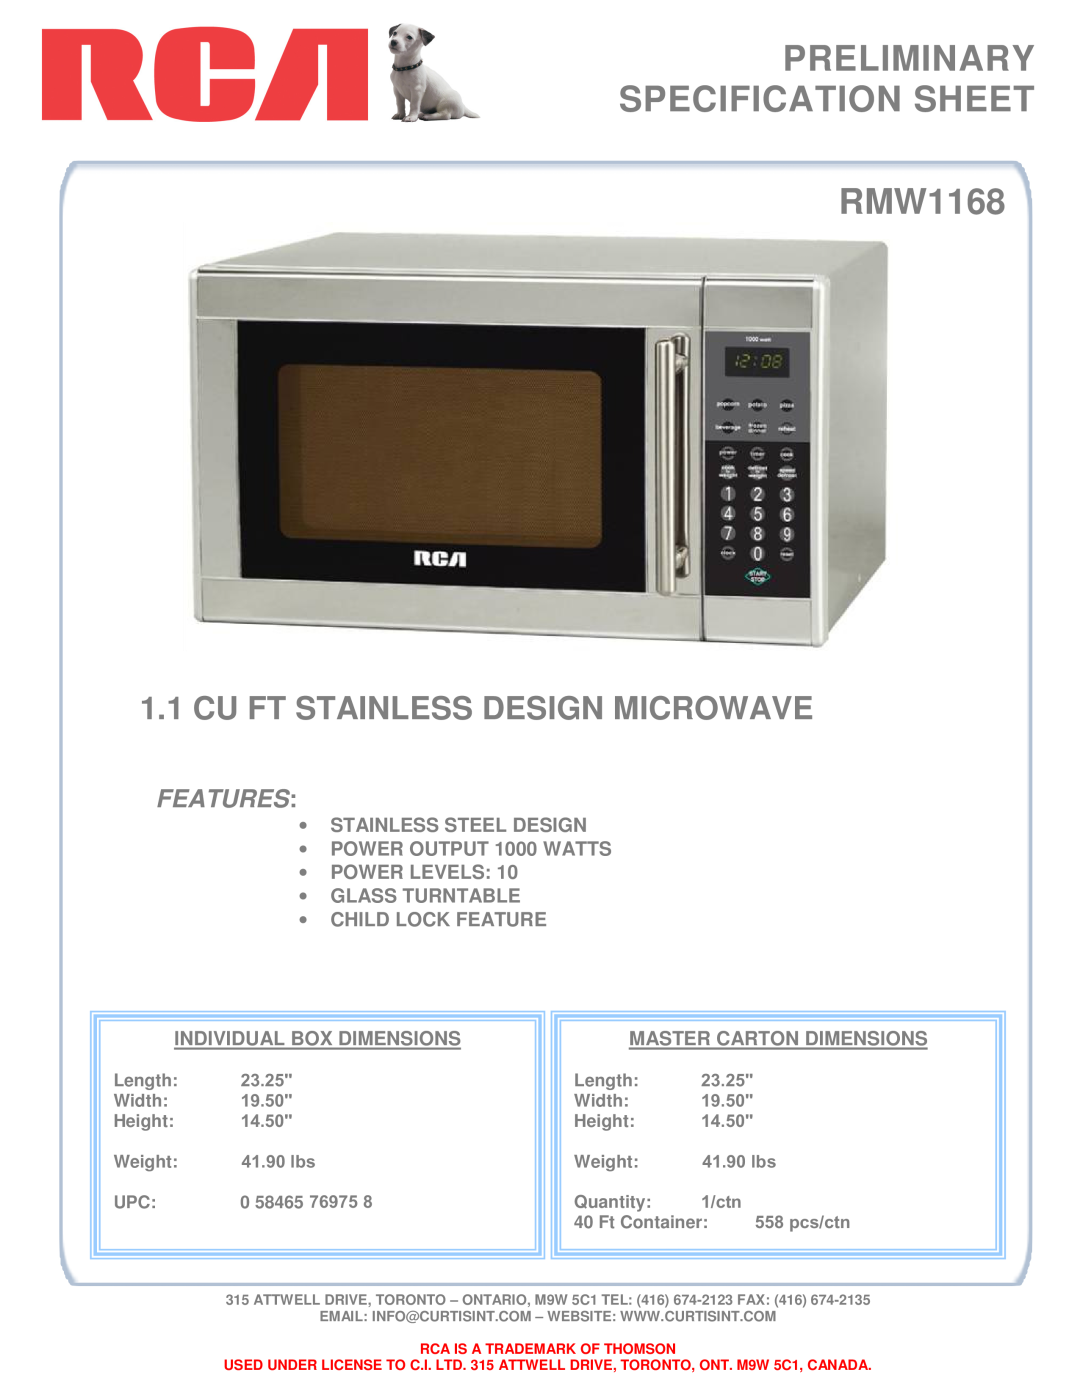 RCA dimensions PRELIMINARY SPECIFICATION SHEET RMW1168, Cu Ft Stainless Design Microwave, Features, Child Lock Feature 